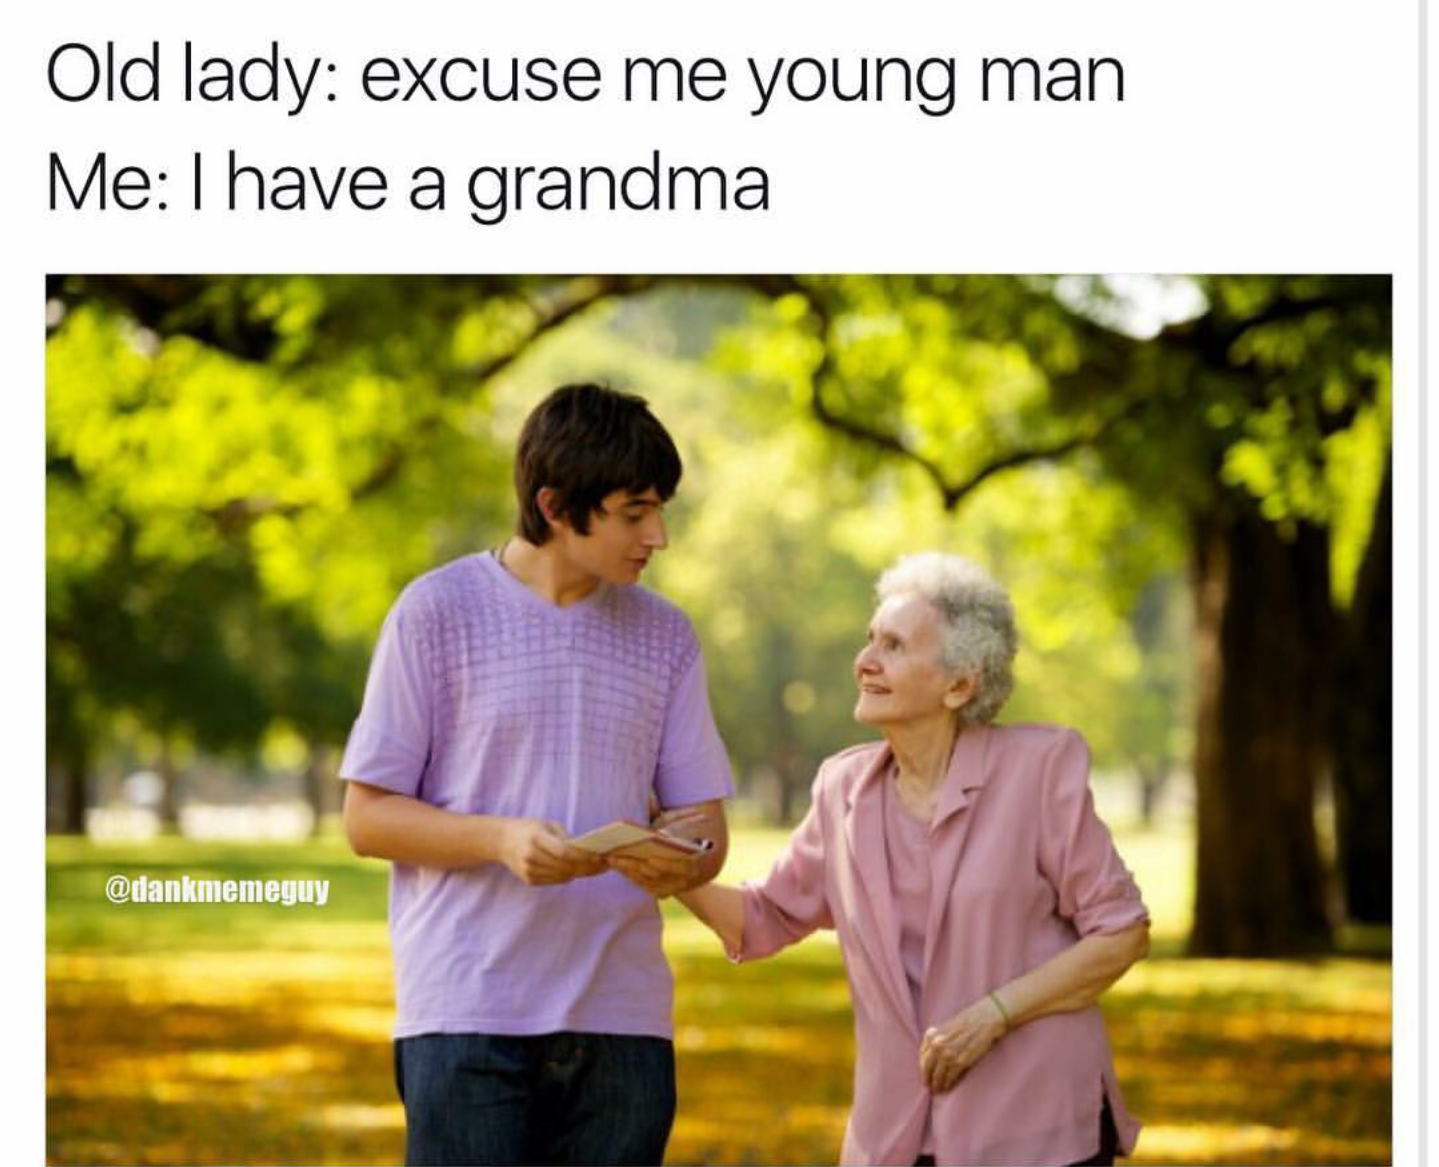 old ladies with young men memes - Old lady excuse me young man Me I have a grandma